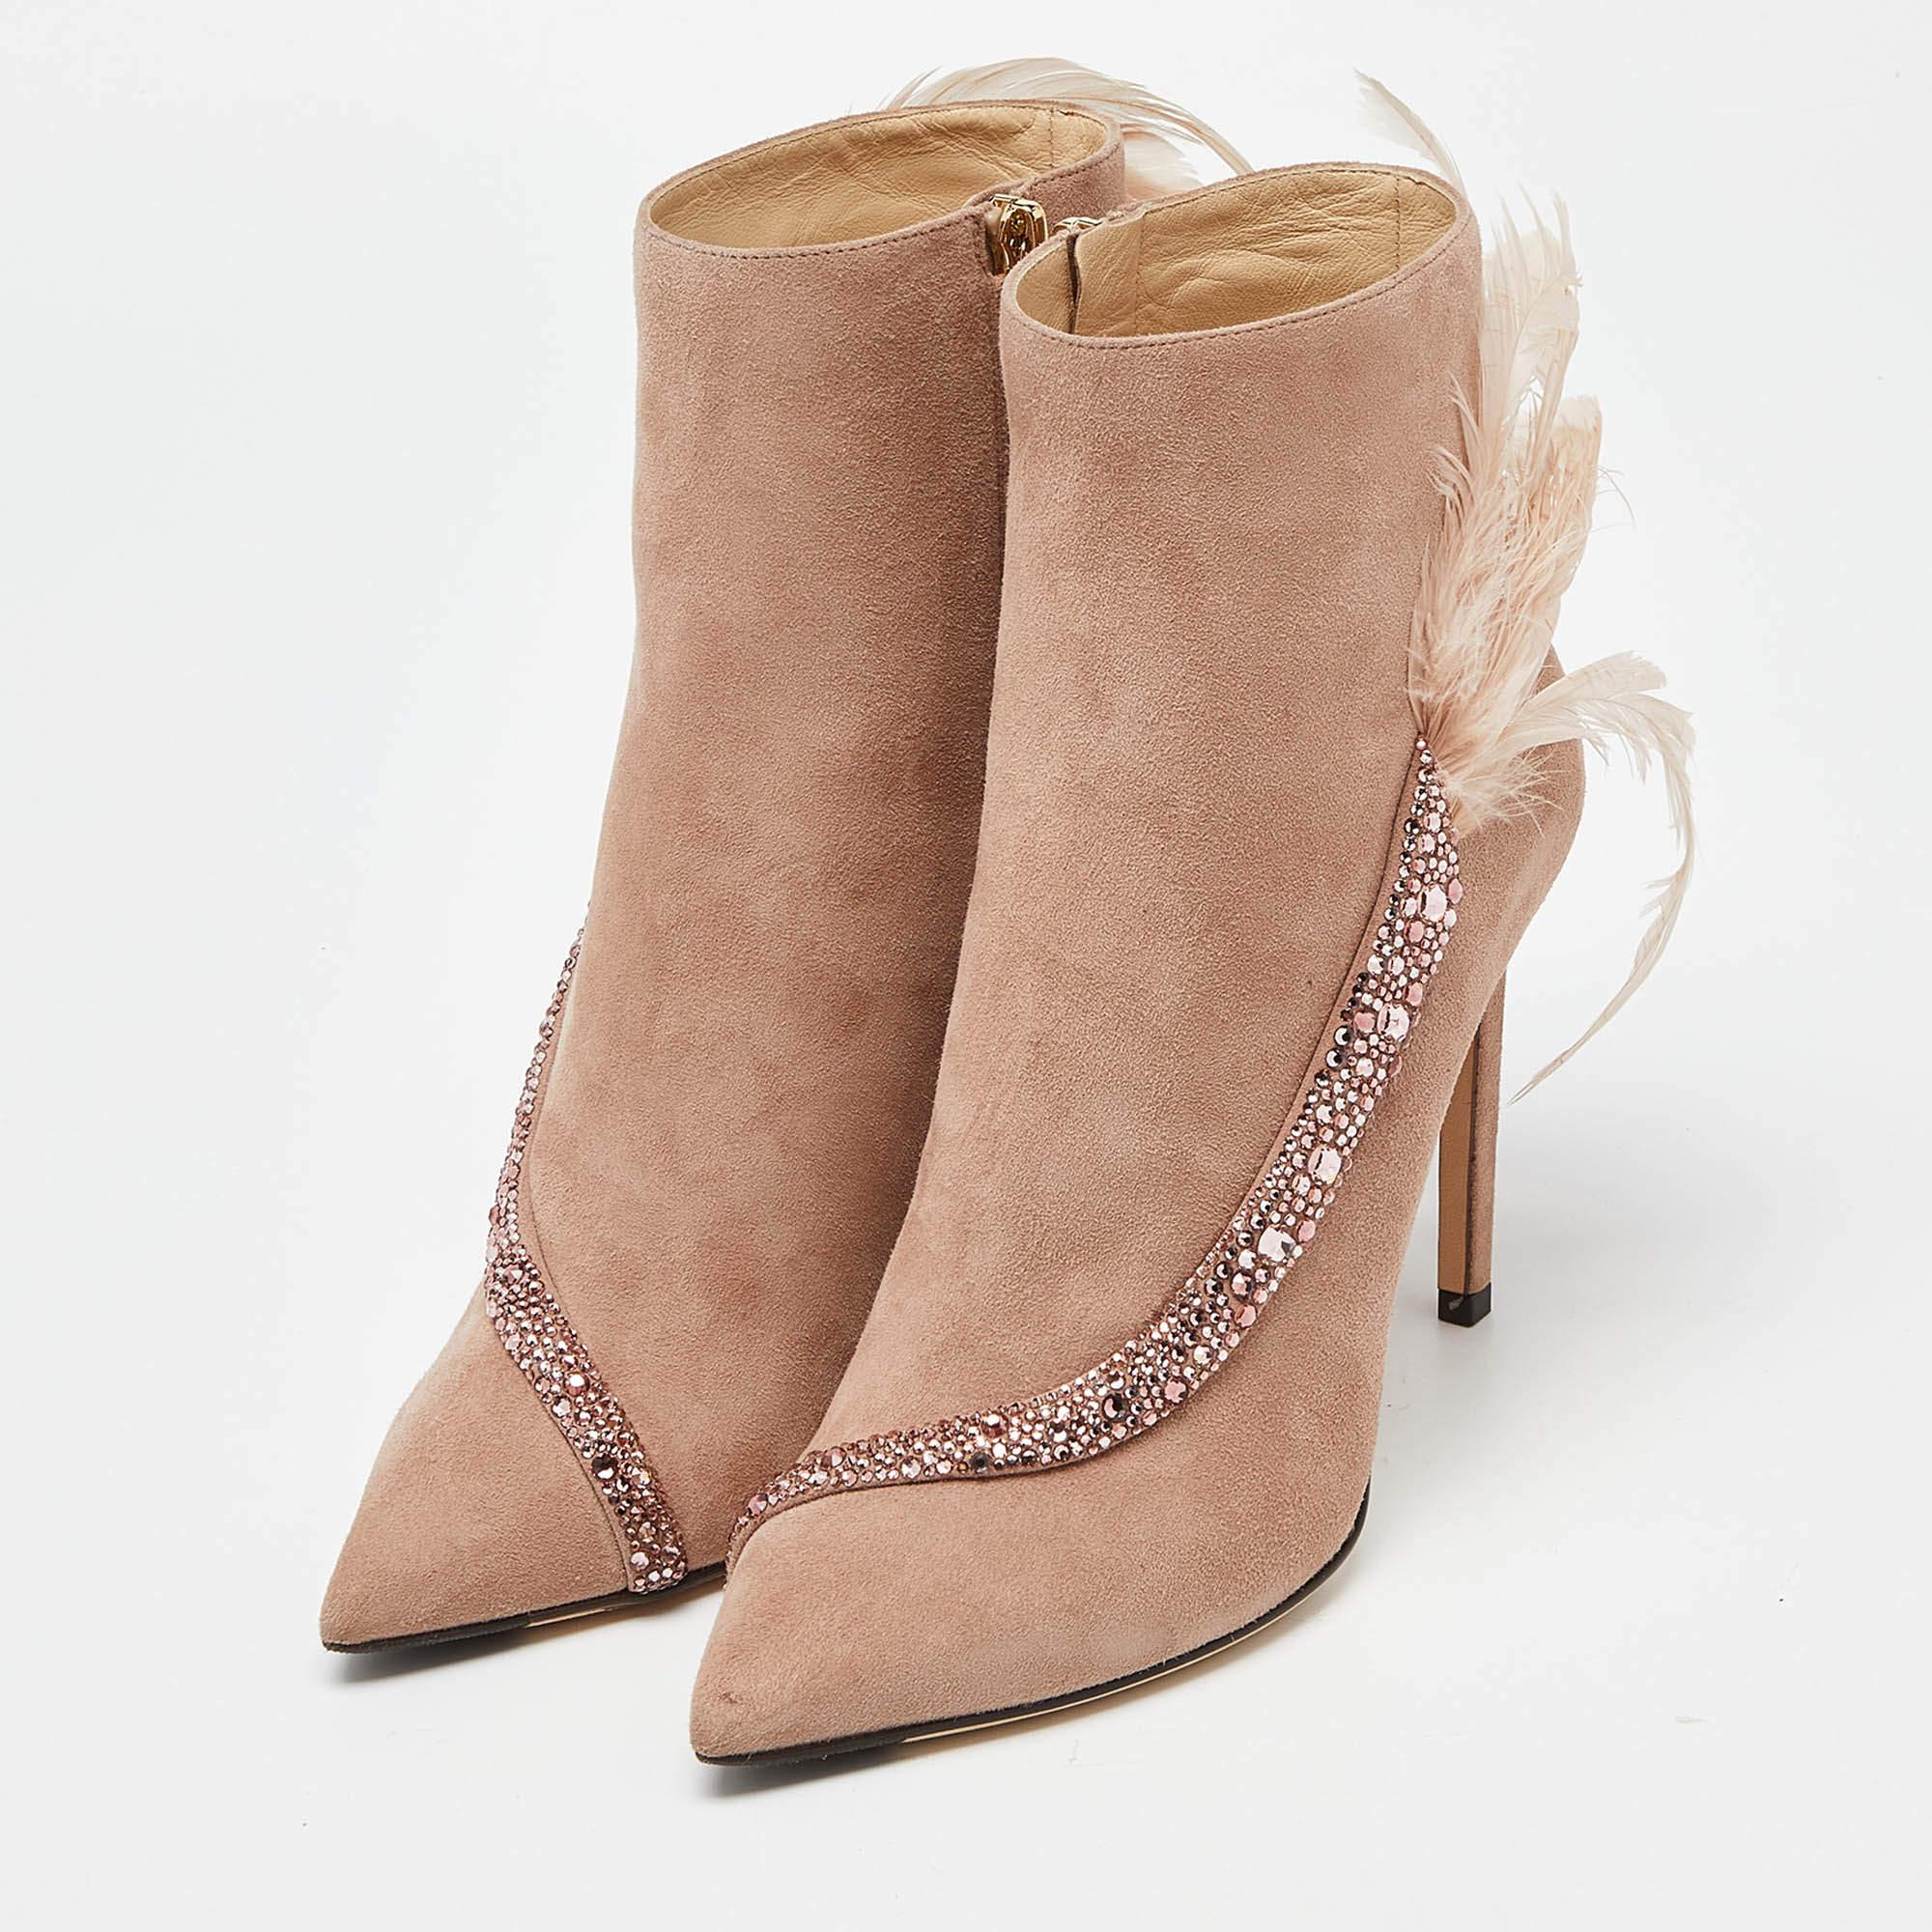 These ankle boots from Jimmy Choo are meant to be a loved choice. Wonderfully crafted and balanced on sleek heels, the shoes will lift your feet in a stunning silhouette.

